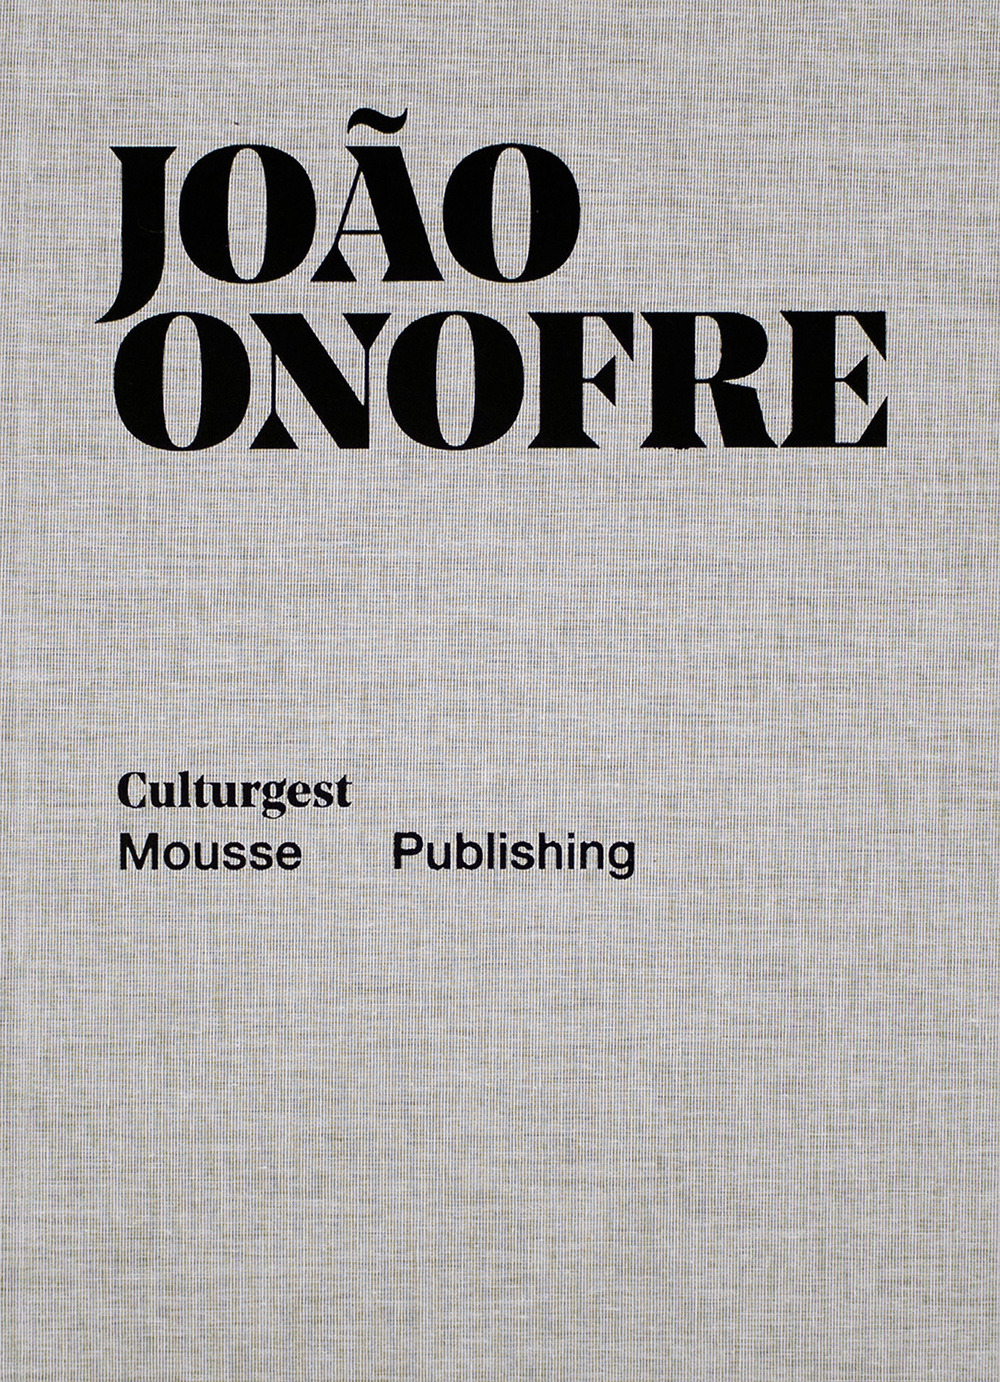 João Onofre. Once in a lifetime (repeat)